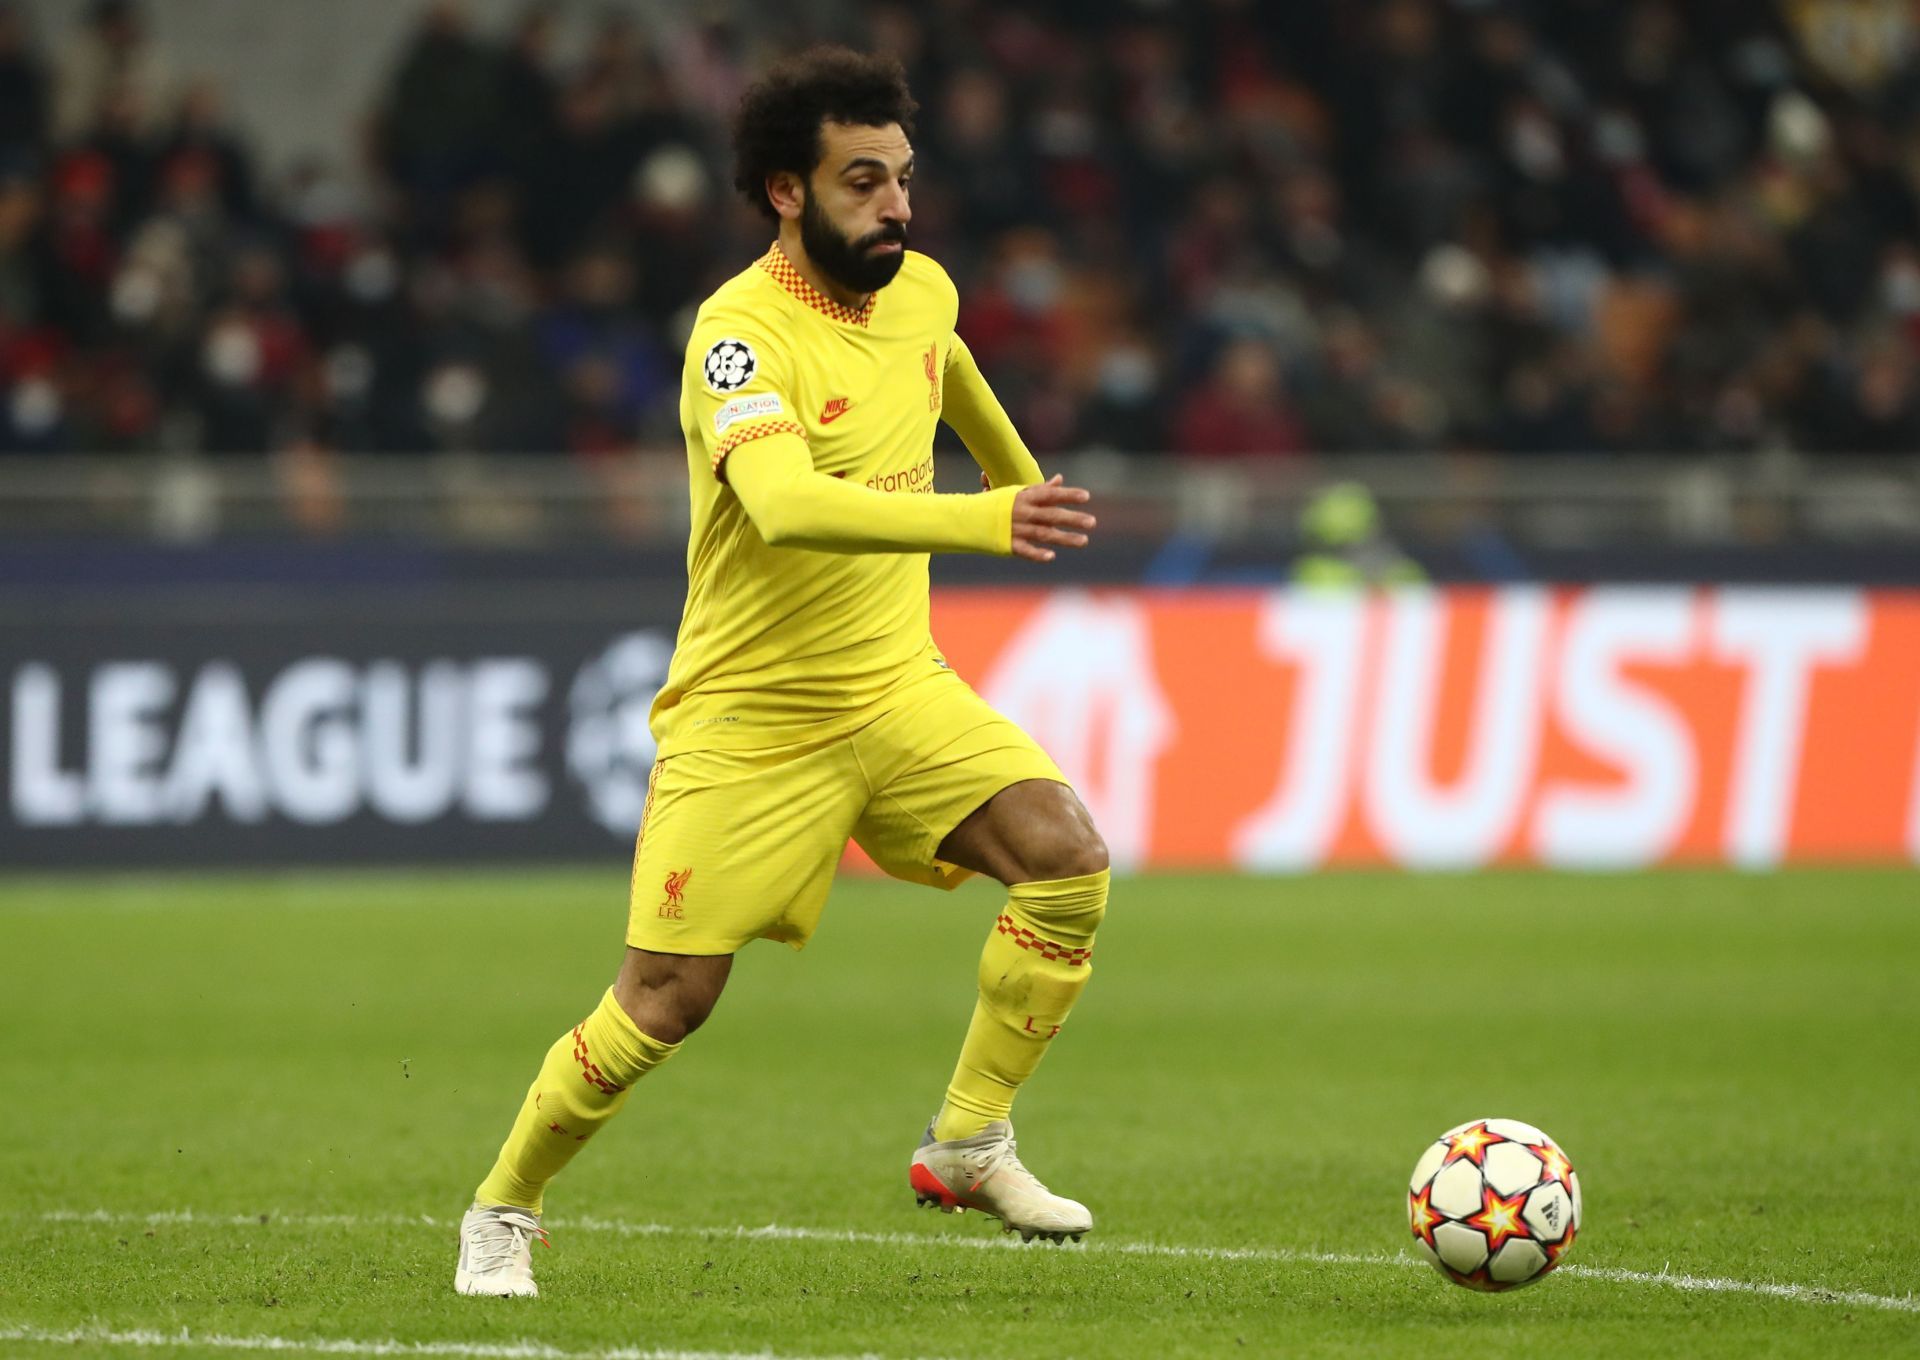 Mohamed Salah is arguably the best player in the world right now.